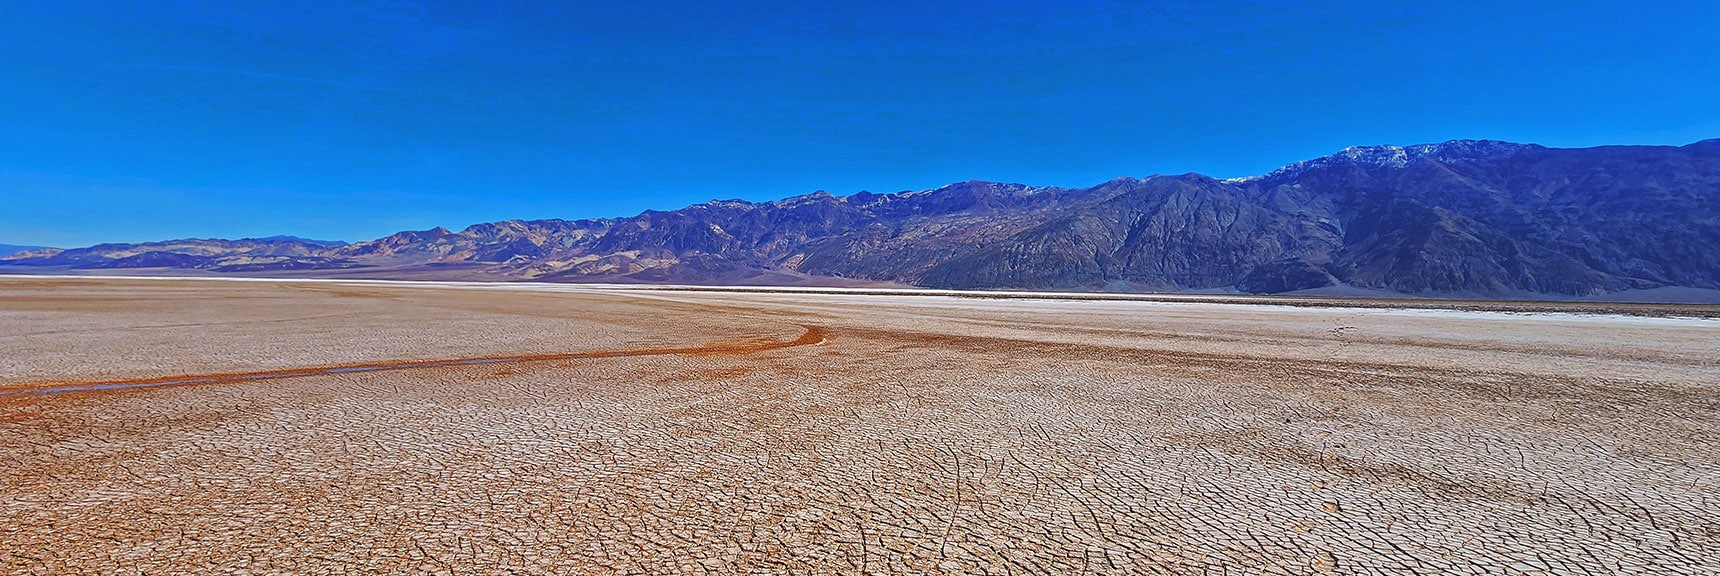 View Northeast. Stream Channels Throughout These Mid-Valley Mud Flats | Death Valley Crossing | Death Valley National Park, California | David Smith | LasVegasAreaTrails.com